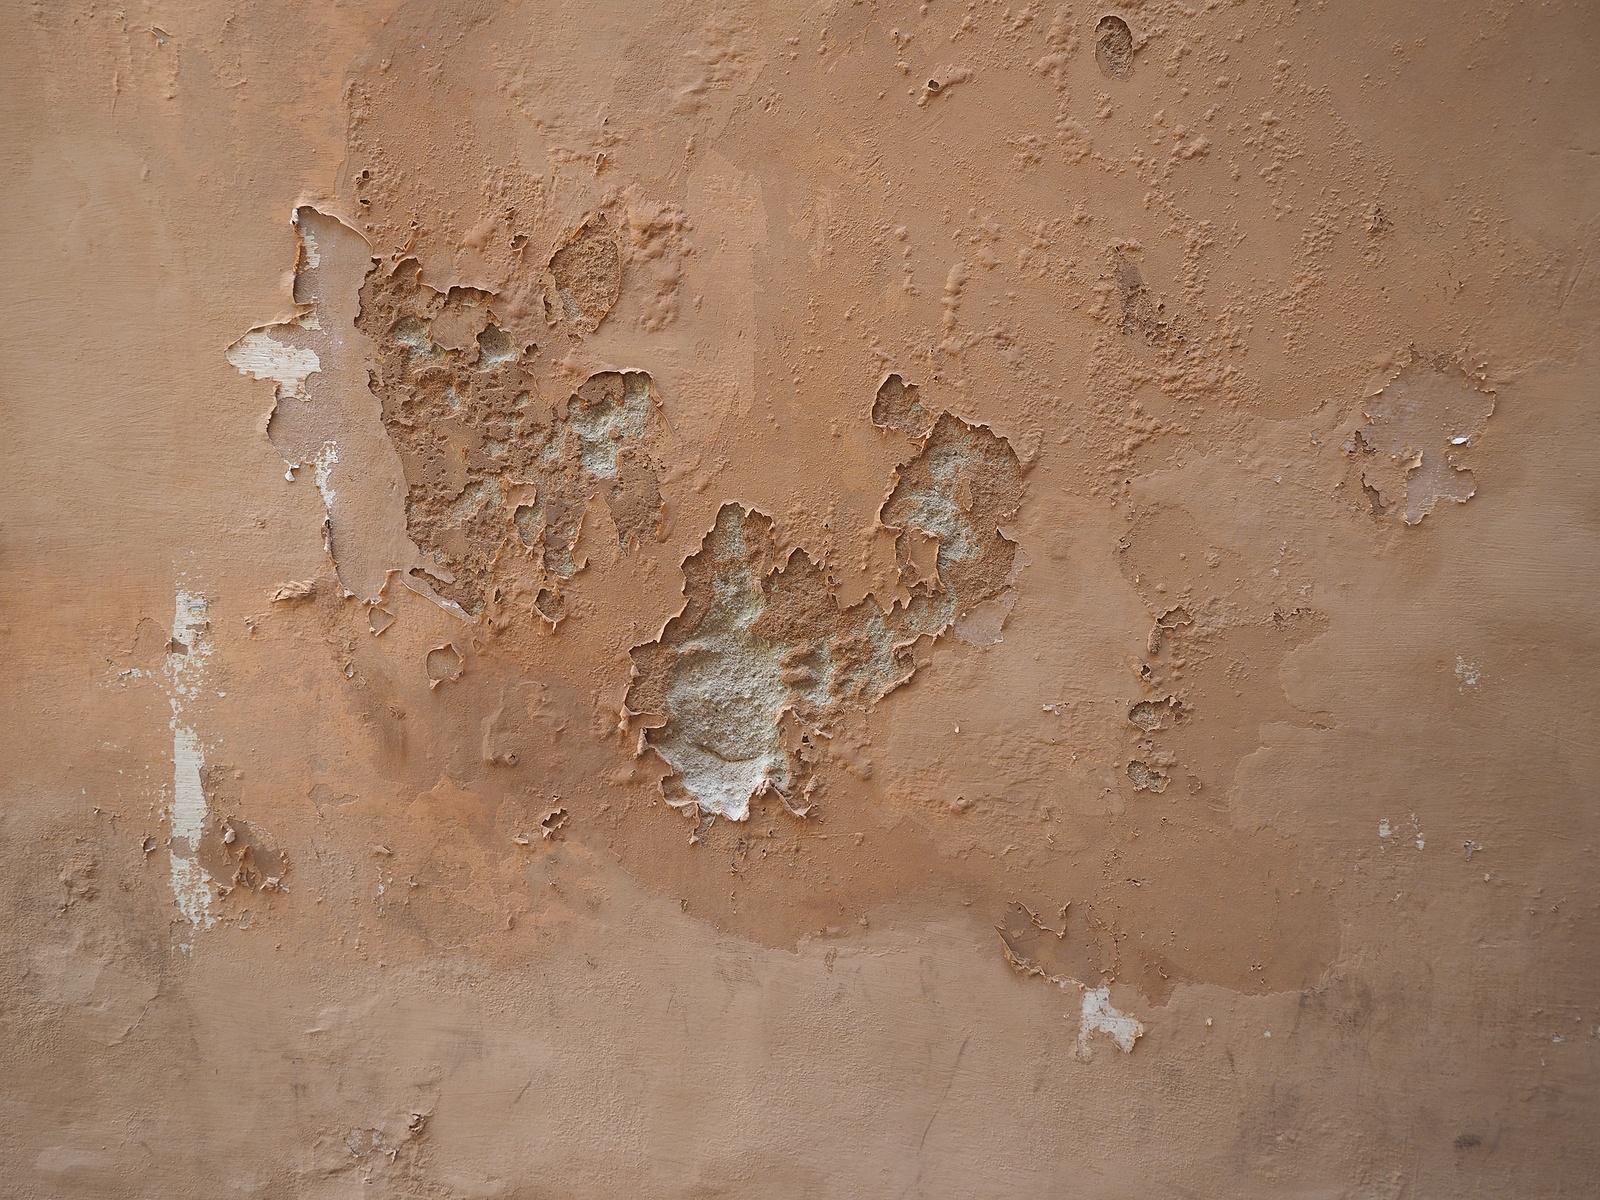 How to Repair Water Damage On Plaster Walls